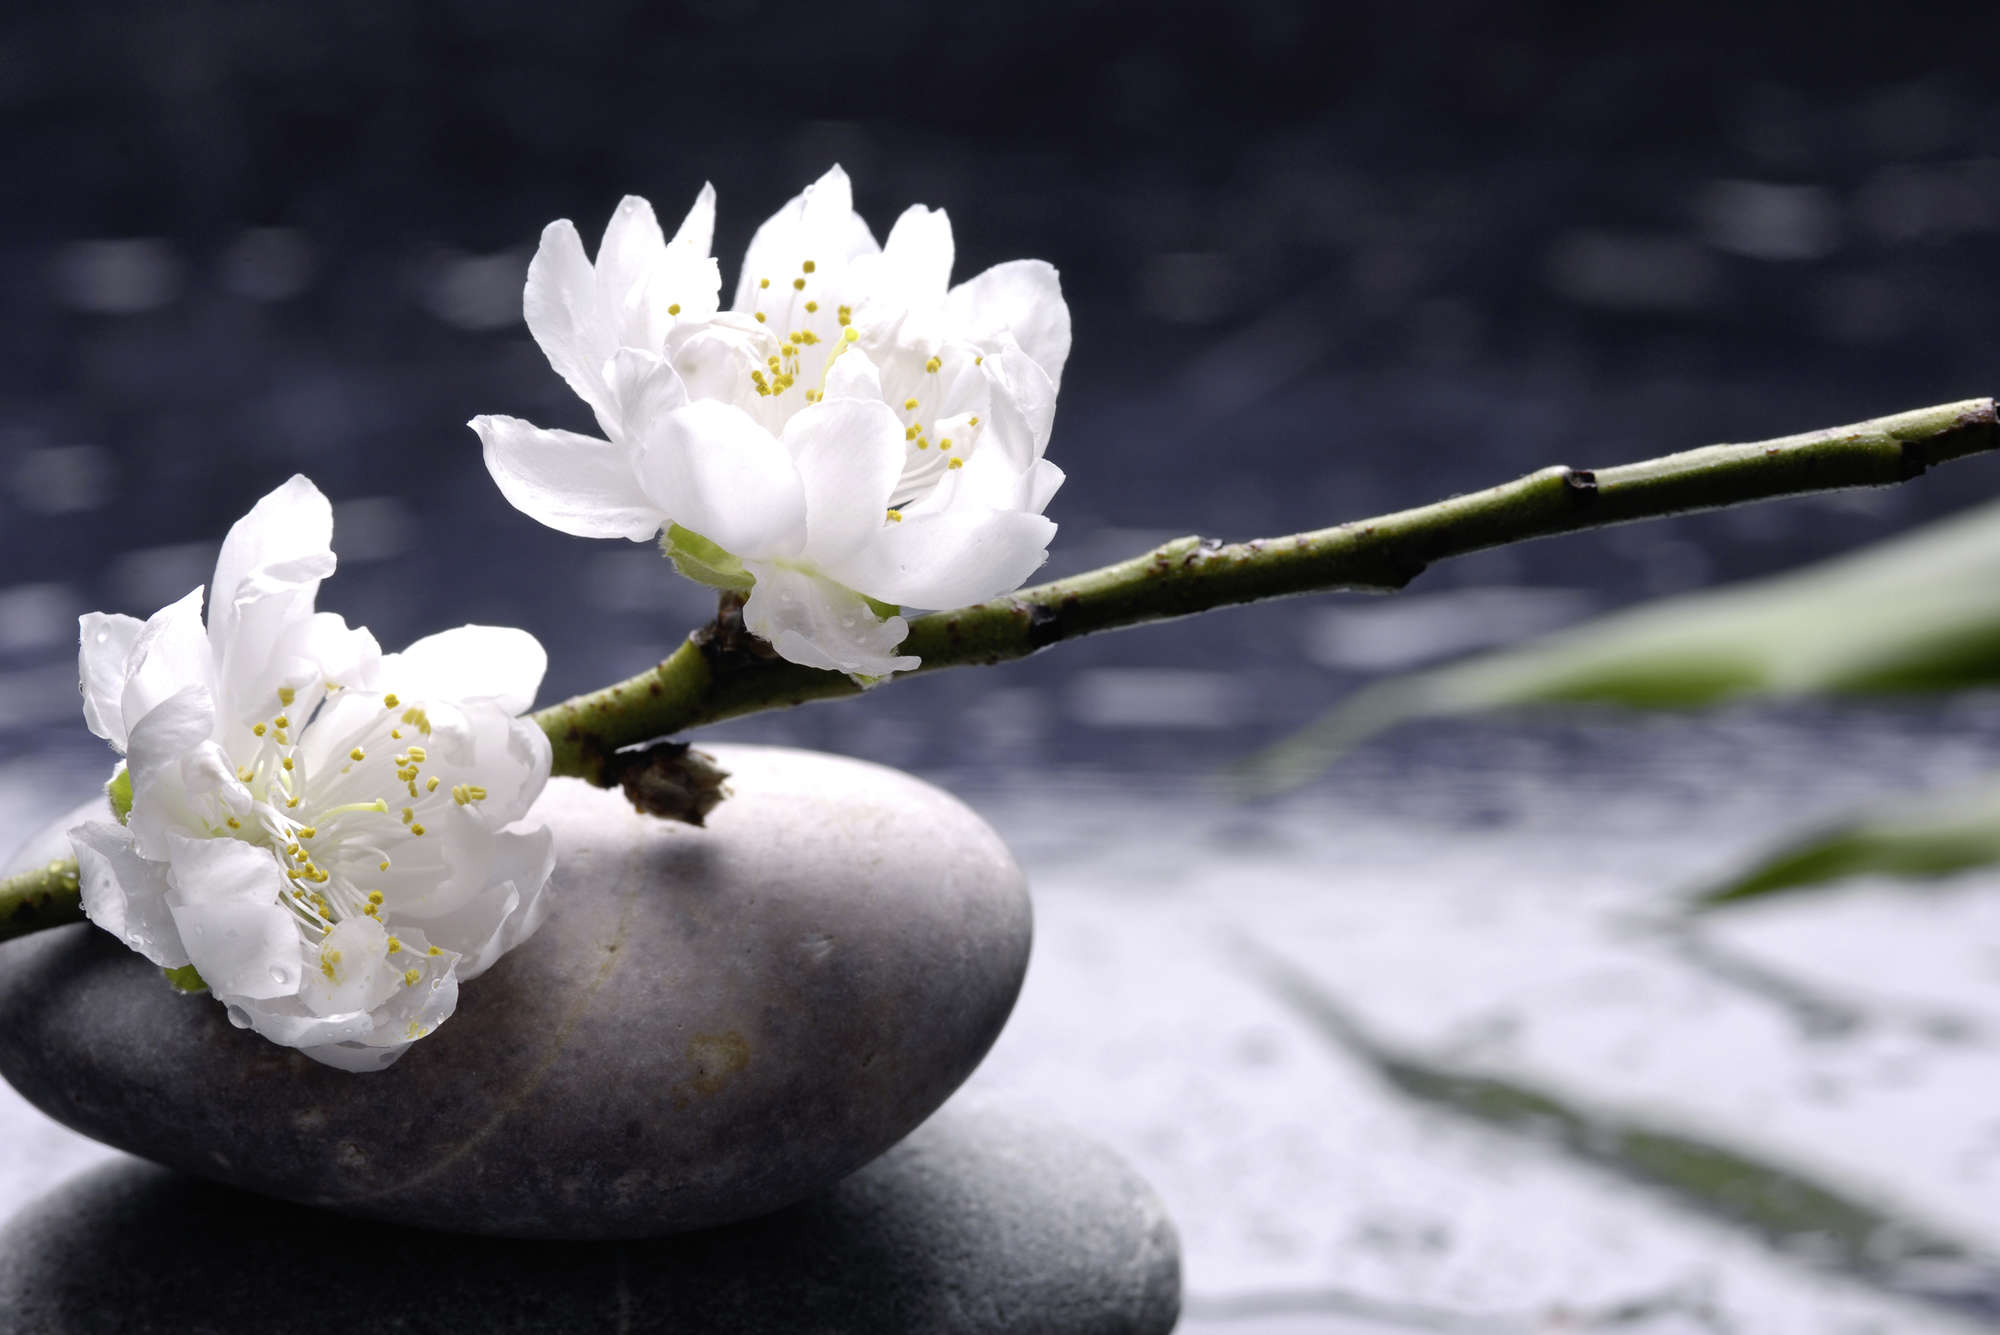             Photo wallpaper Wellness Stones with Blossoms - mother-of-pearl smooth fleece
        